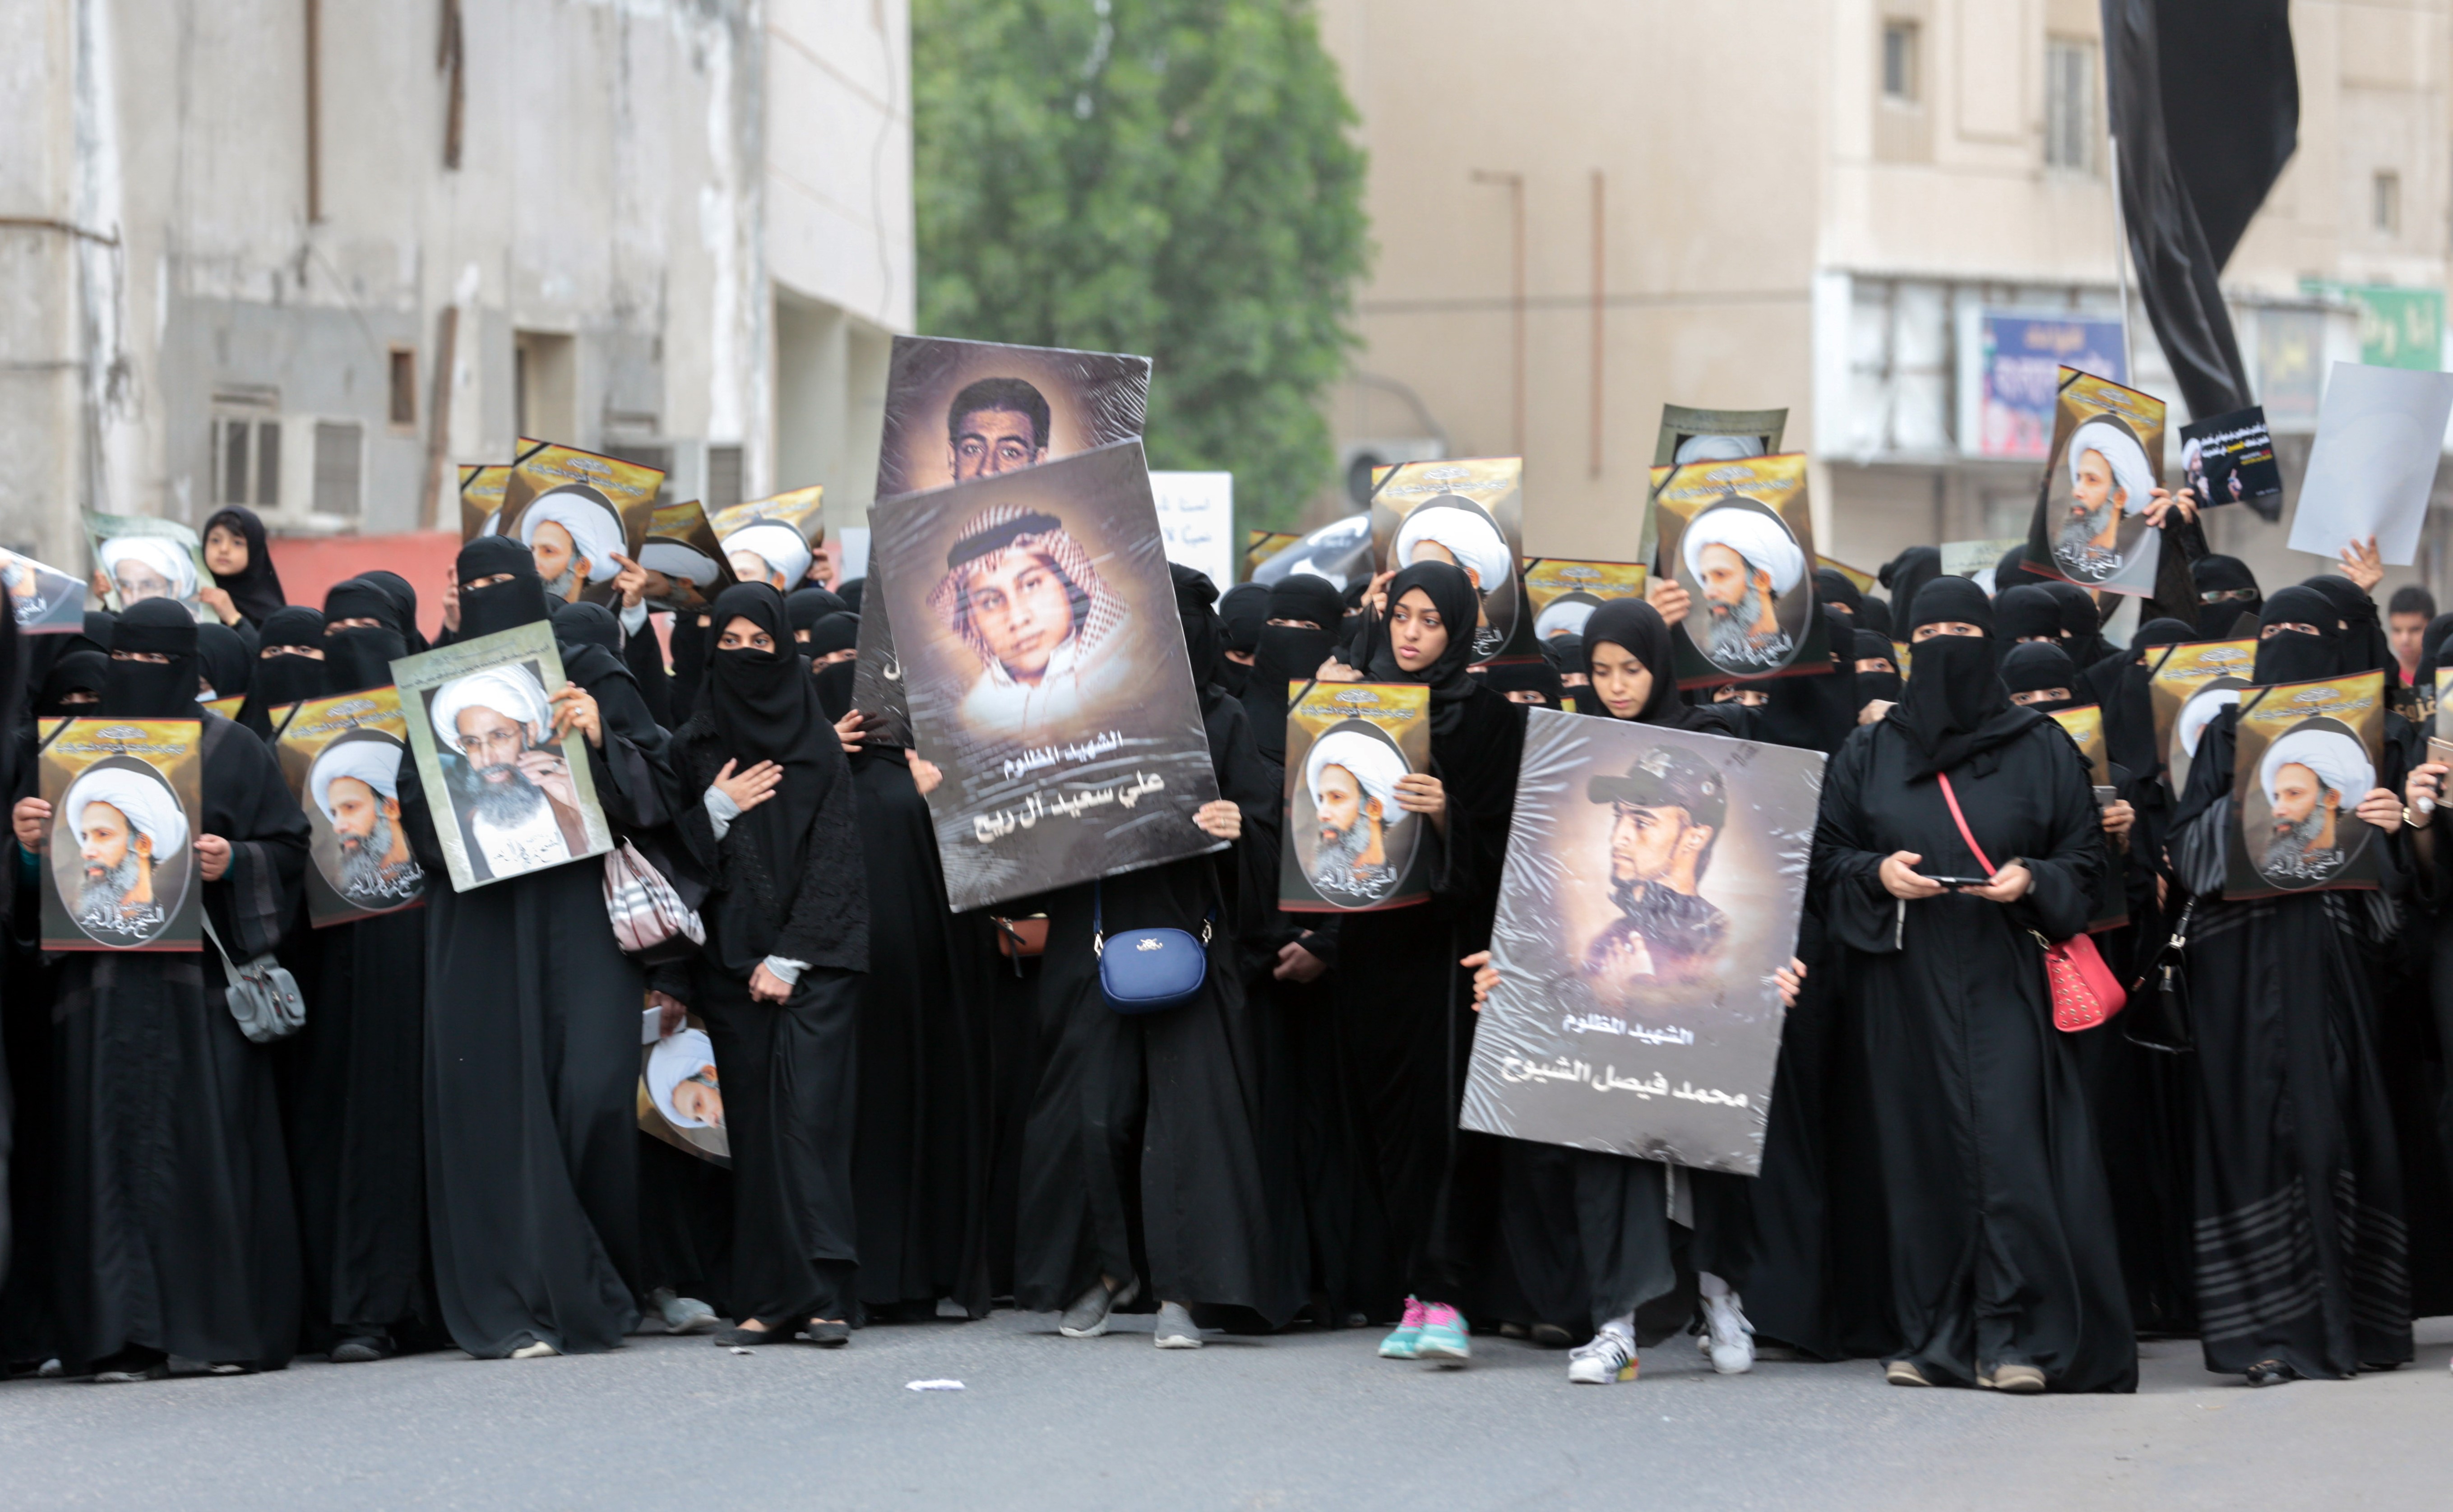 Saudi Shiite women hold placards bearing a portrait of prominent Shiite Muslim cleric Nimr al-Nimr during a protest on 8 January, 2016 in Qatif (AFP)